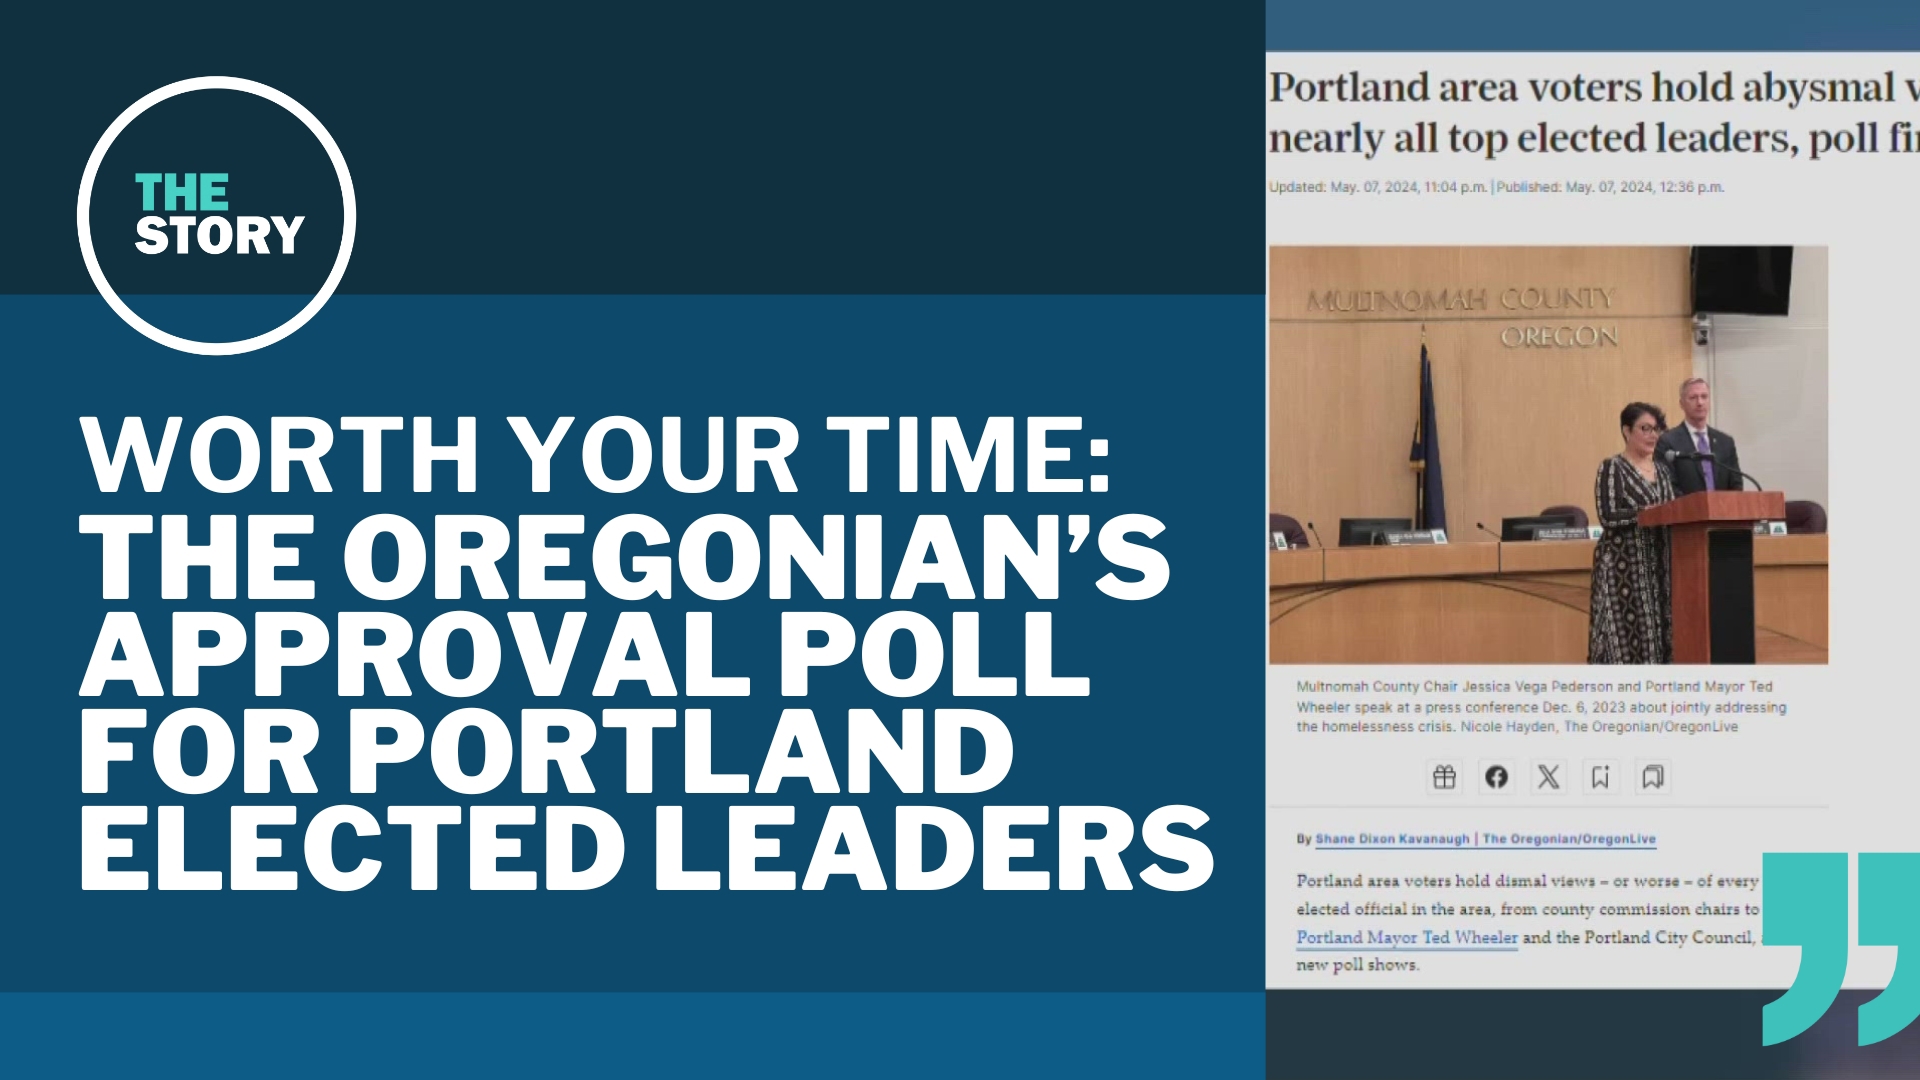 The Oregonian surveyed voters to find out what they thought of their leaders. "Unfavorable" might be putting it lightly for the outlook on local officials.